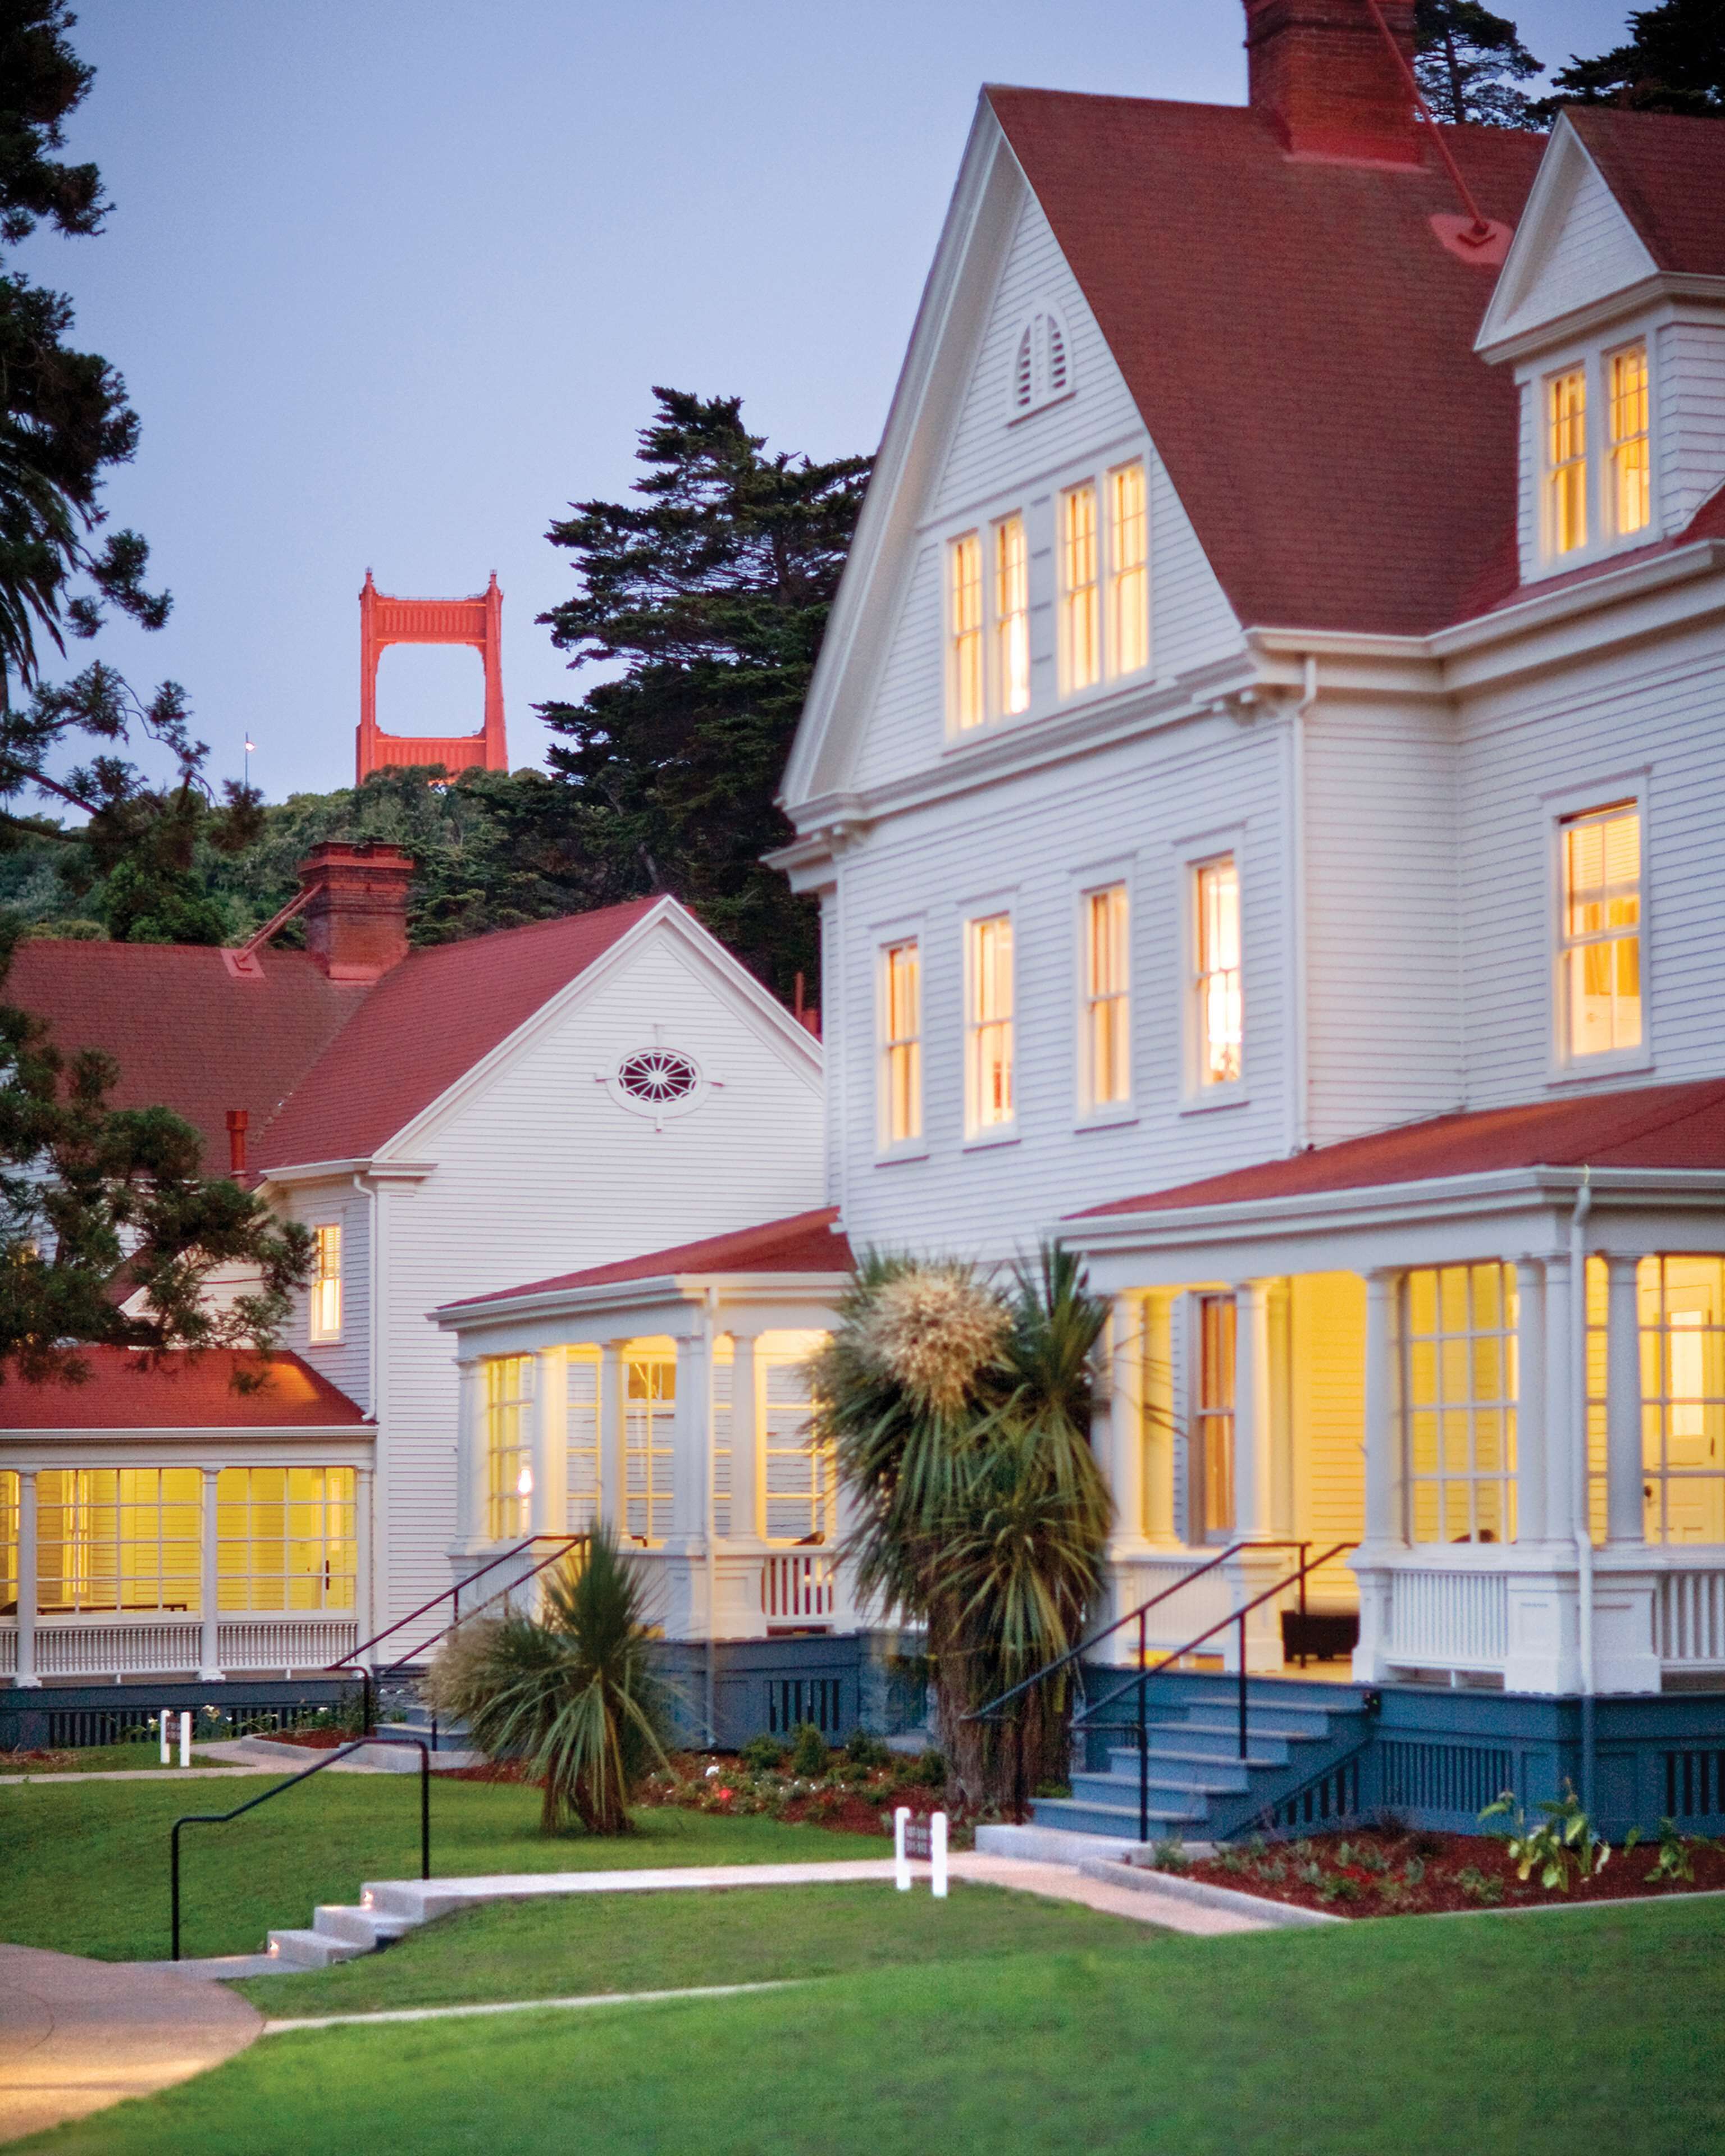 Cavallo Point - the Lodge at the Golden Gate